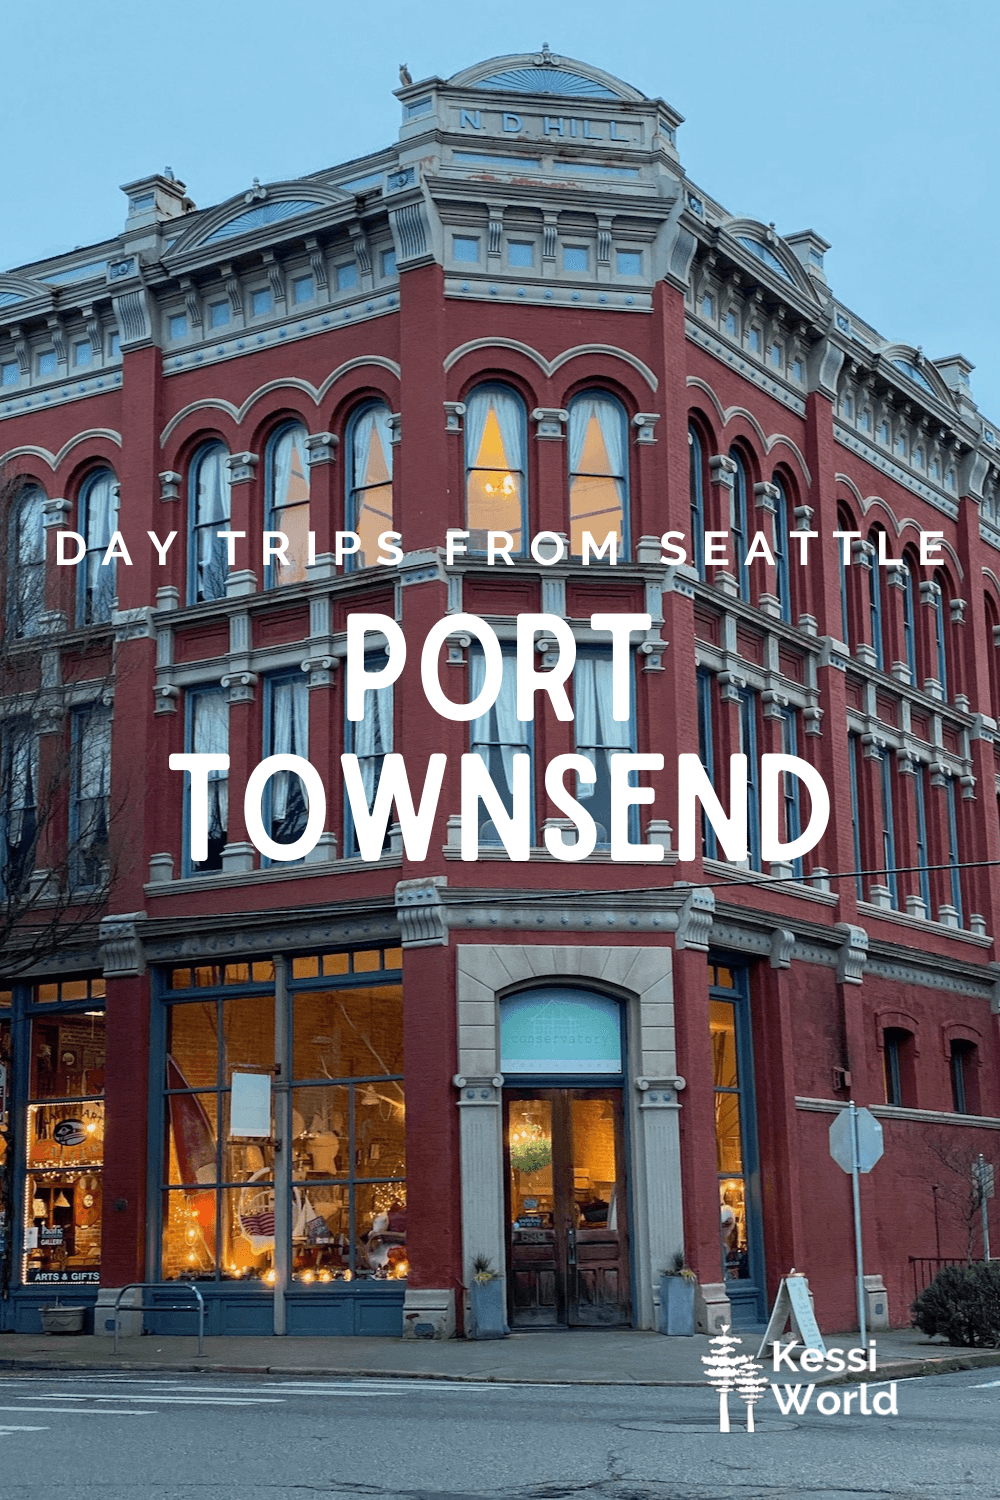 This Pinterest pin displays white letters that read "day trips from Seattle" and highlights Port Townsend. The photo shows an ornate Victorian-style three Storie building made from red bricks and cement decoration around the cornice of the buildings. The shop on the first floor has a orange glow from the candles lit in the window.